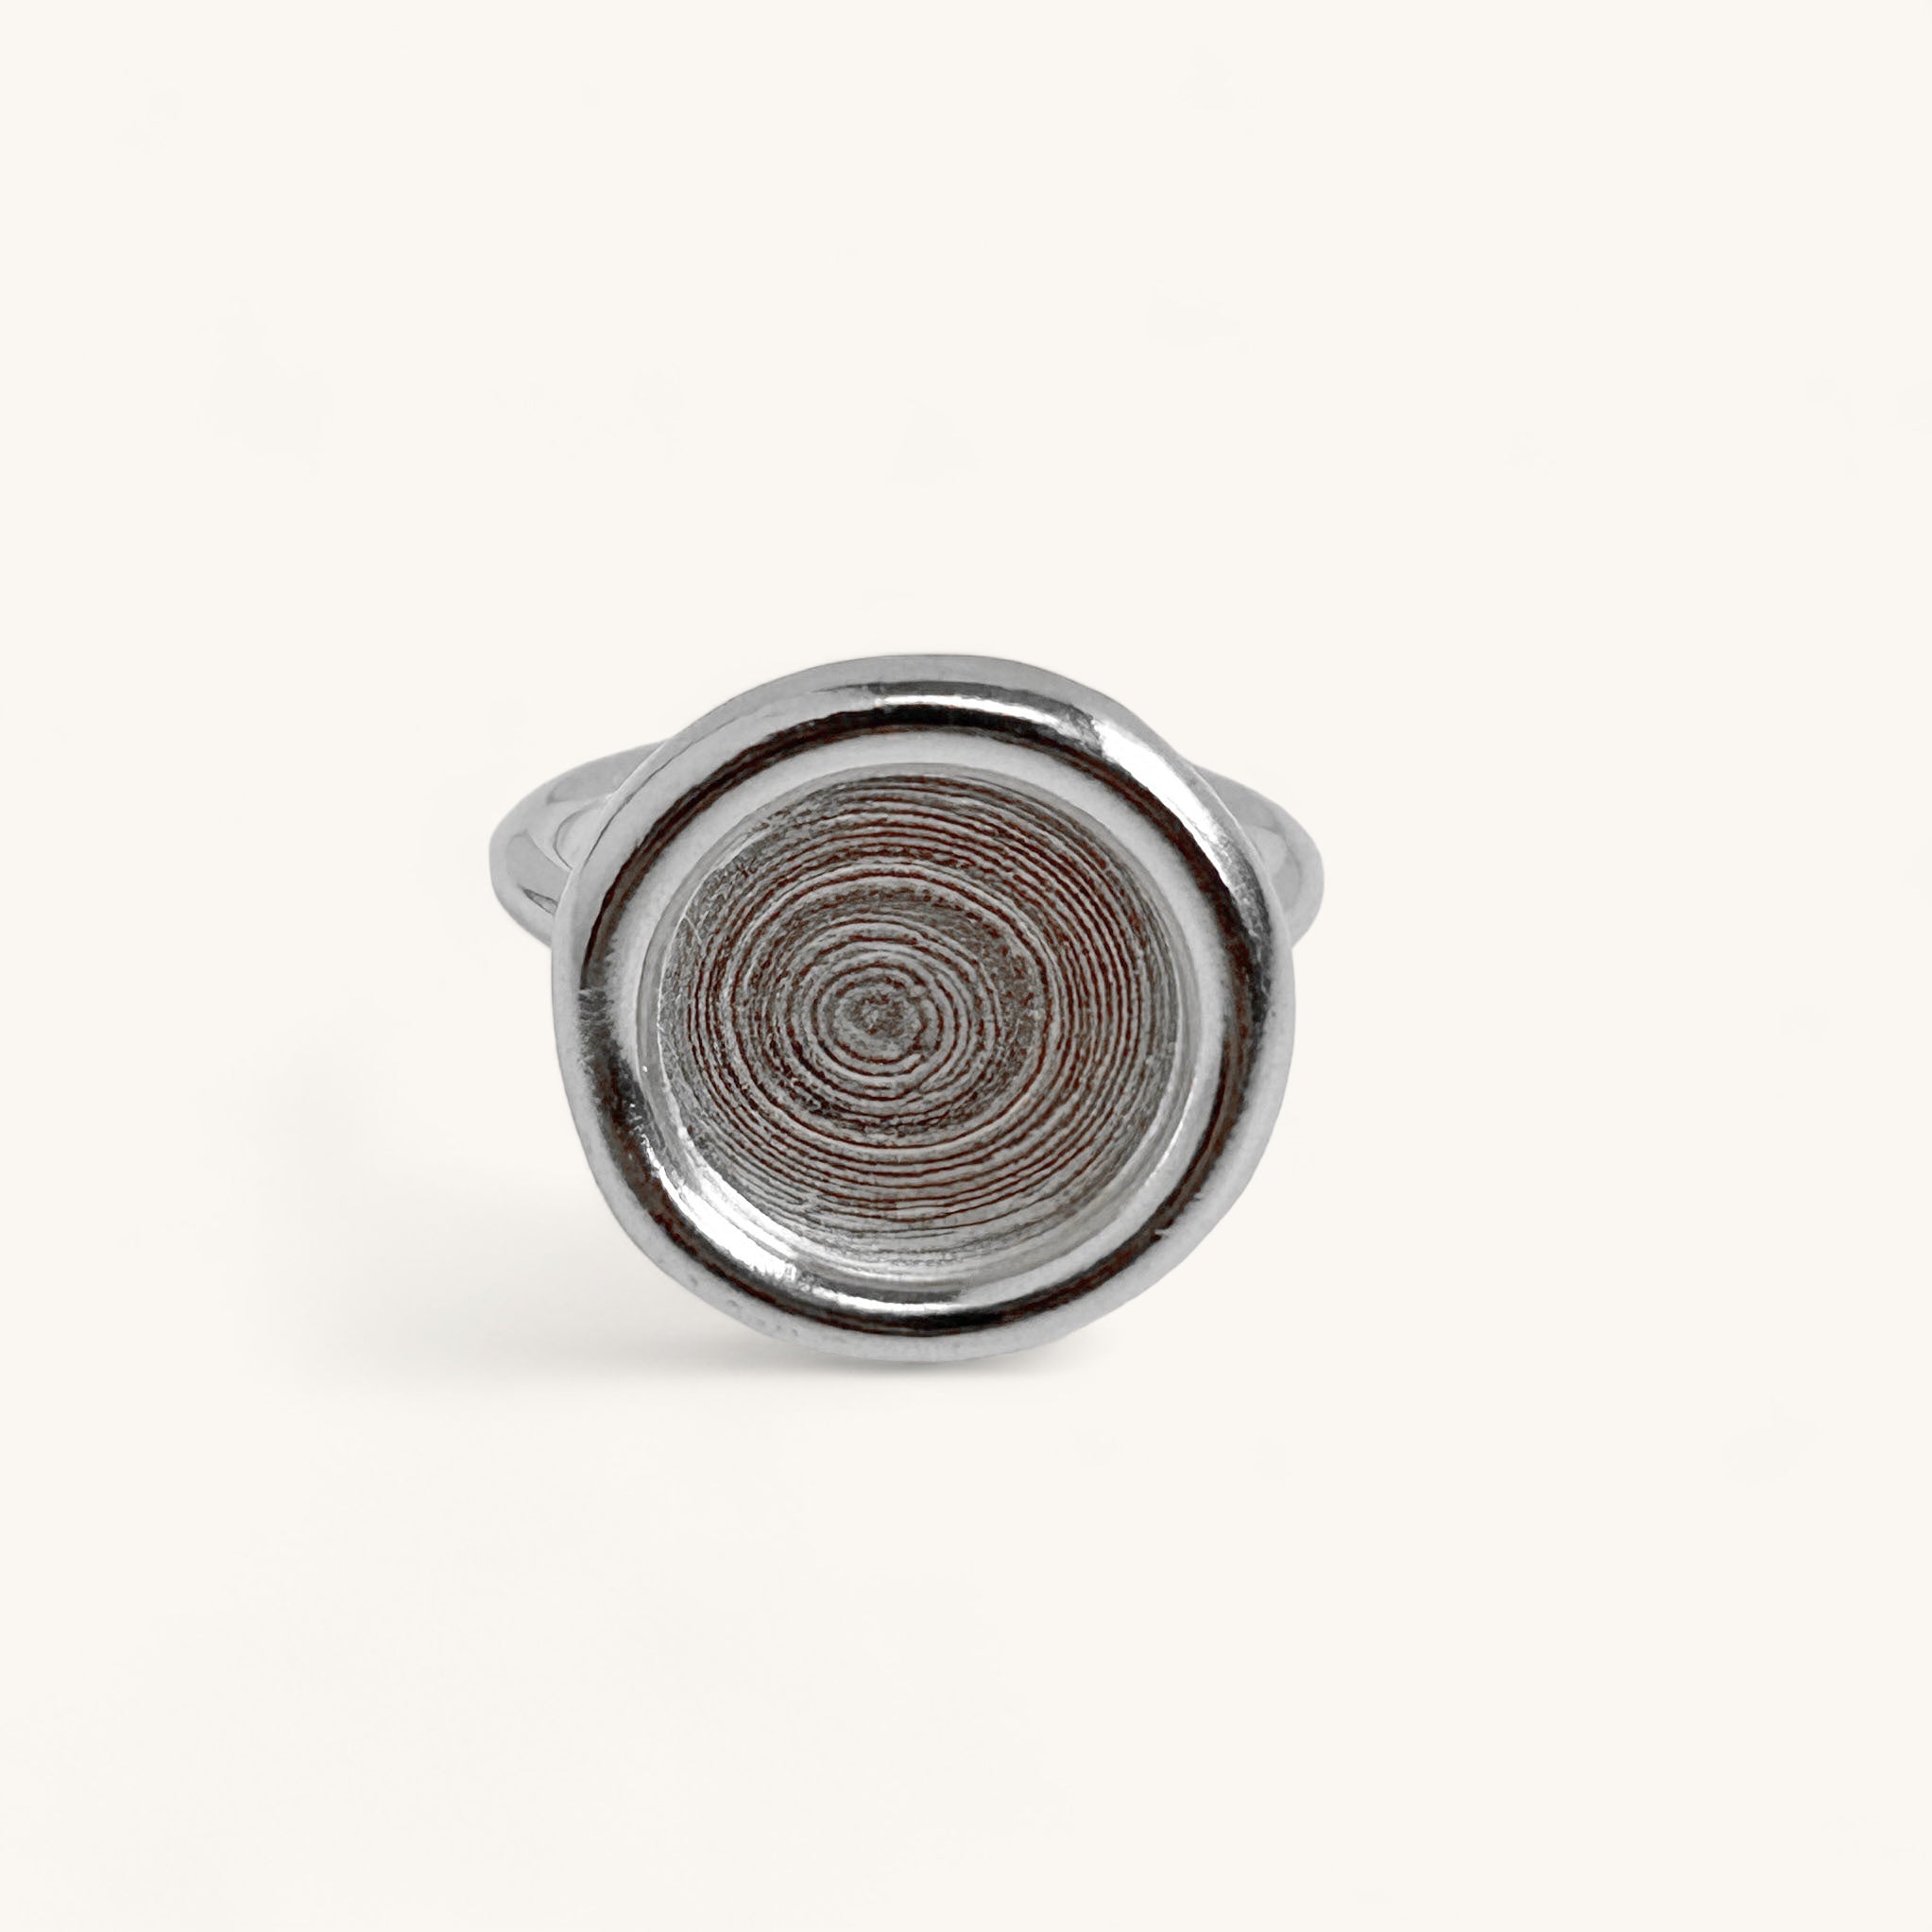 Jennifer Loiselle frame ring in recycled silver